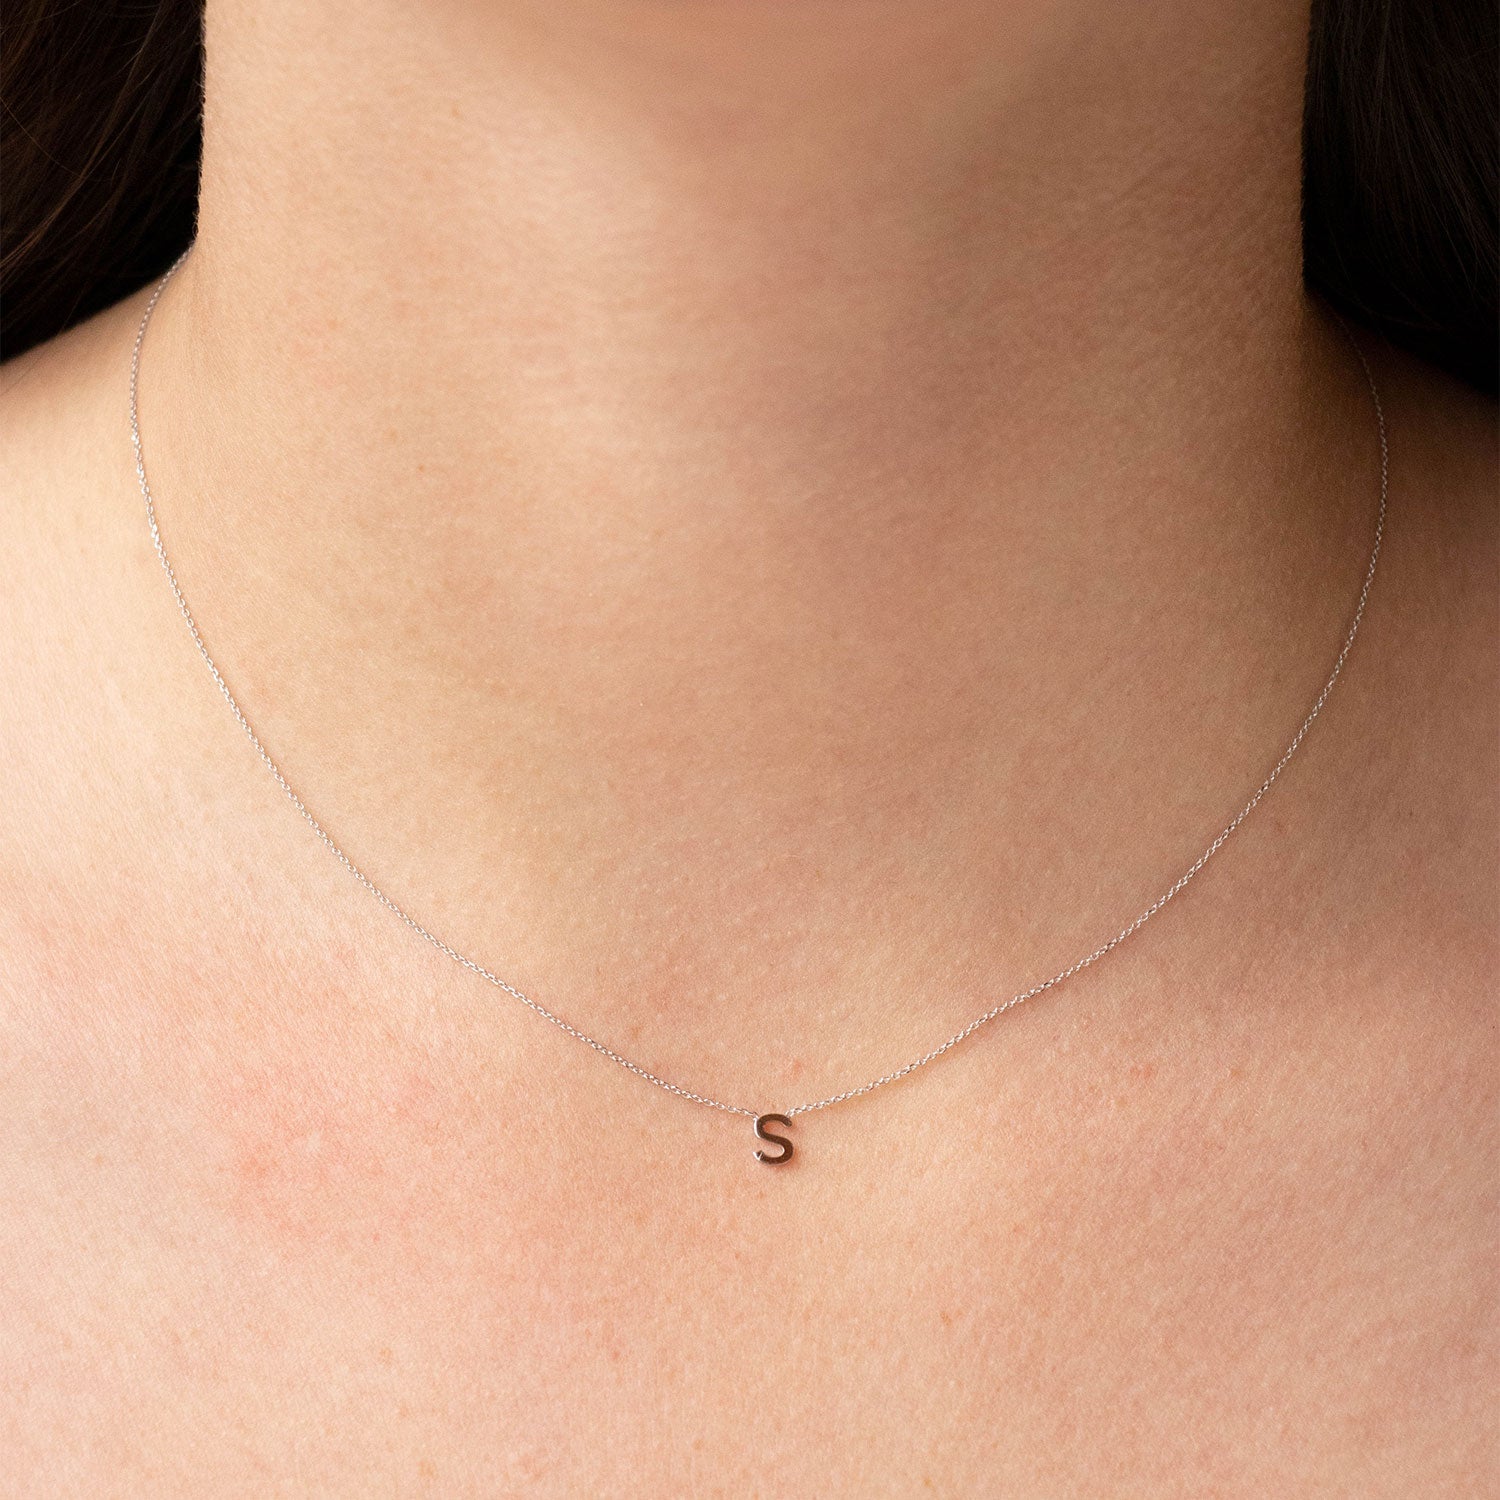 9ct White Gold 'S' Petite Initial Adjustable Letter Necklace 38/43cm